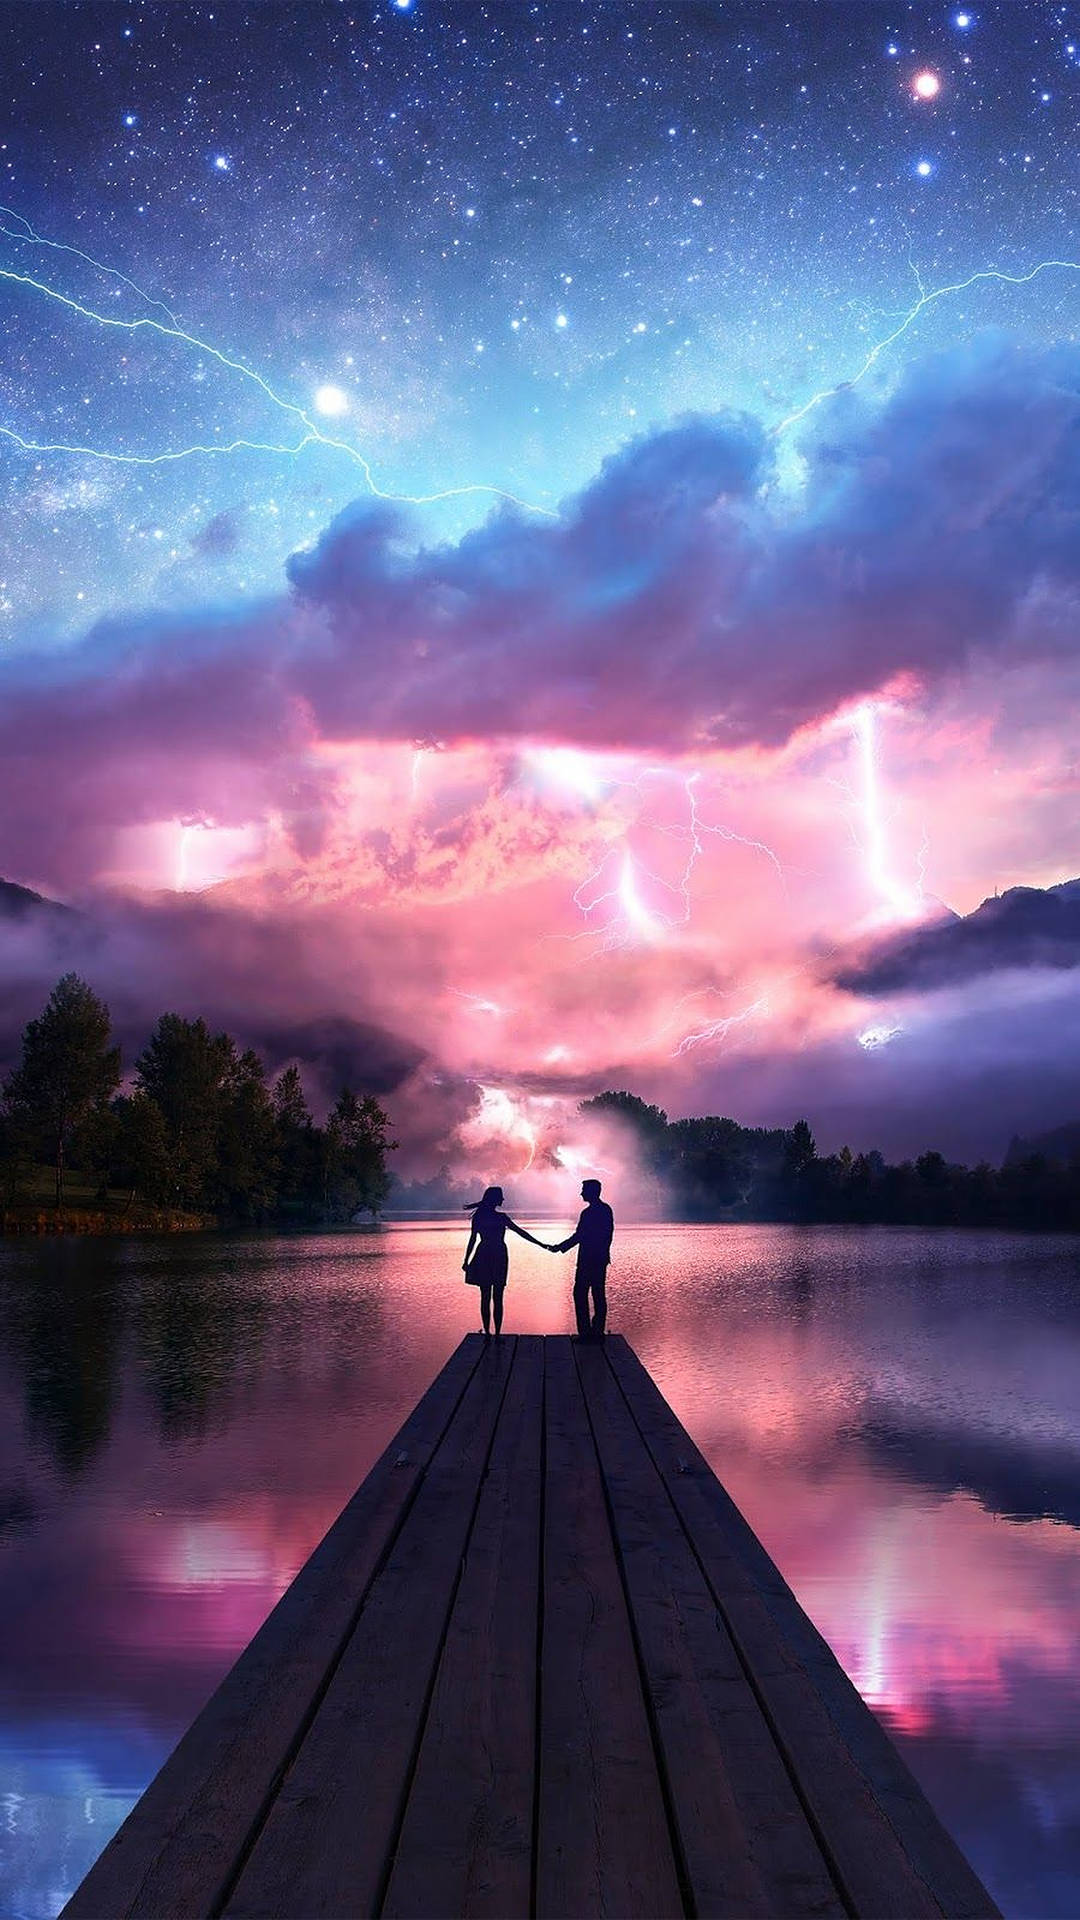 Couple Silhouette In Stormy Weather Wallpaper